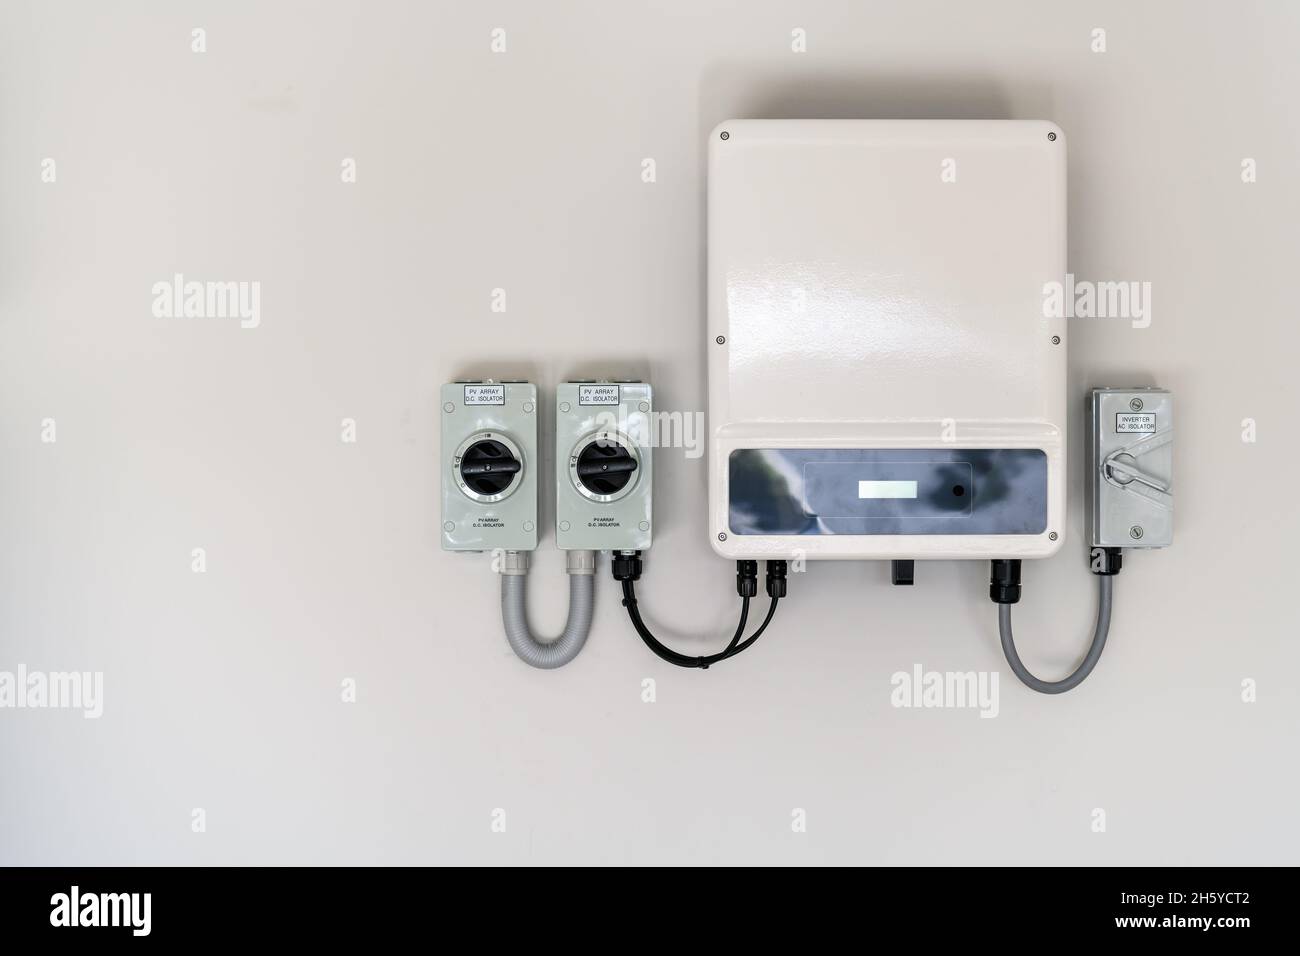 New solar panel inverter with isolators attached to the wall Stock Photo